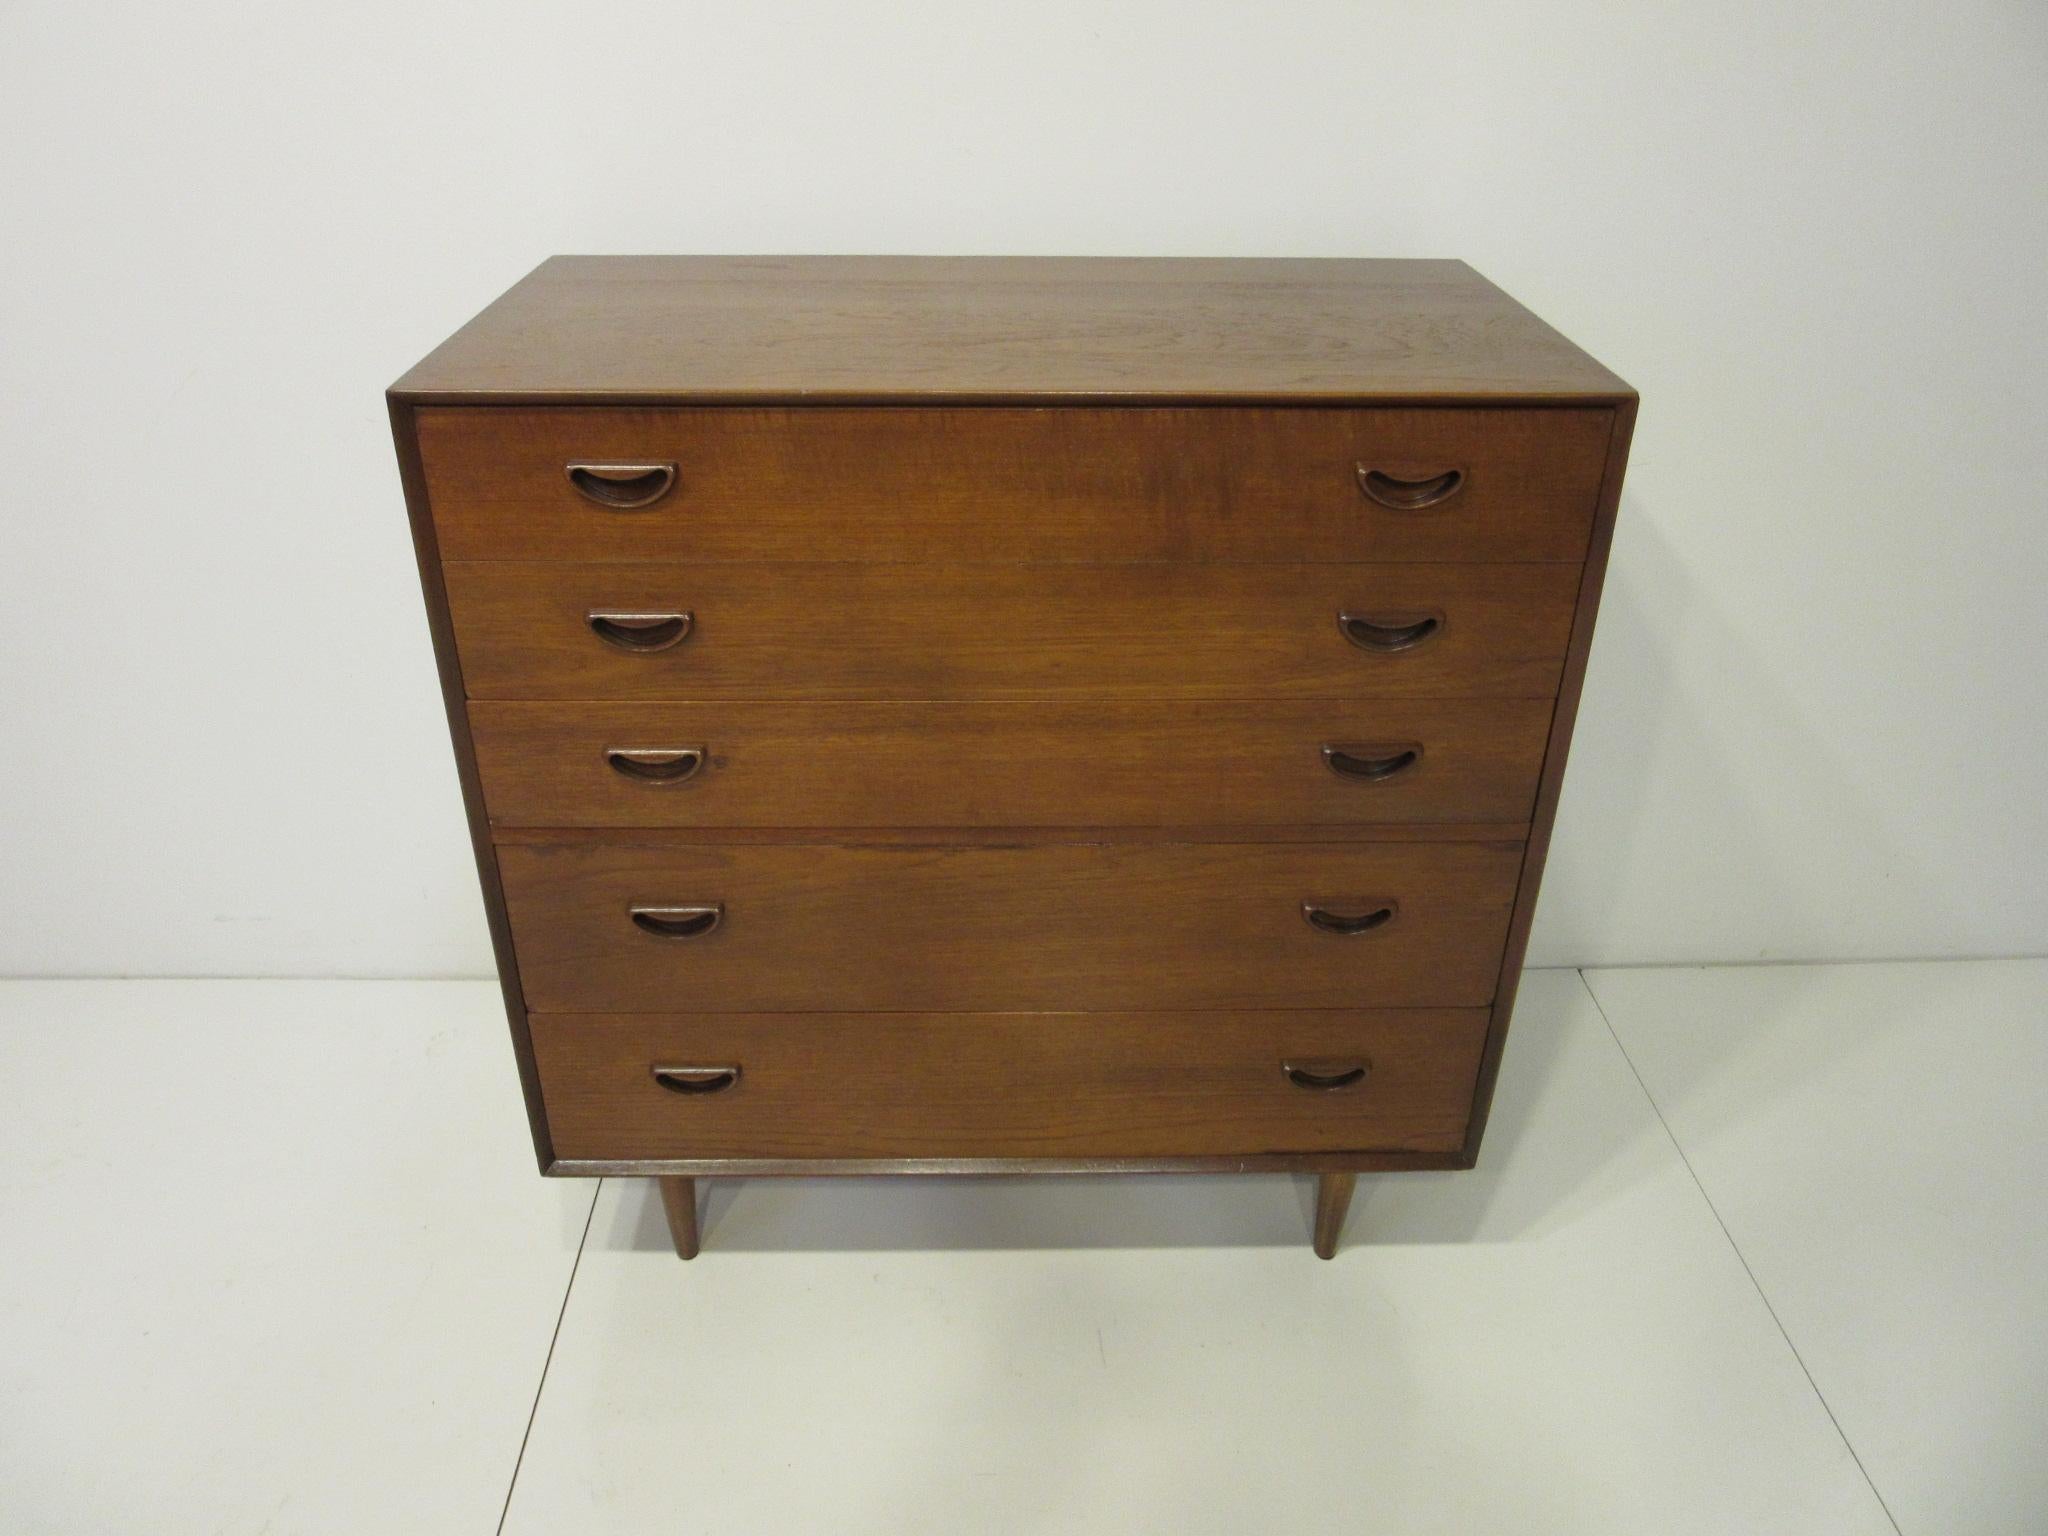 A five-drawer dresser / chest in teak wood with sculptural cut-out pulls with the top edges having dove tail finger joint construction. The two upper drawers have built in dividers and the lower drawers have plenty of storage. Retains the